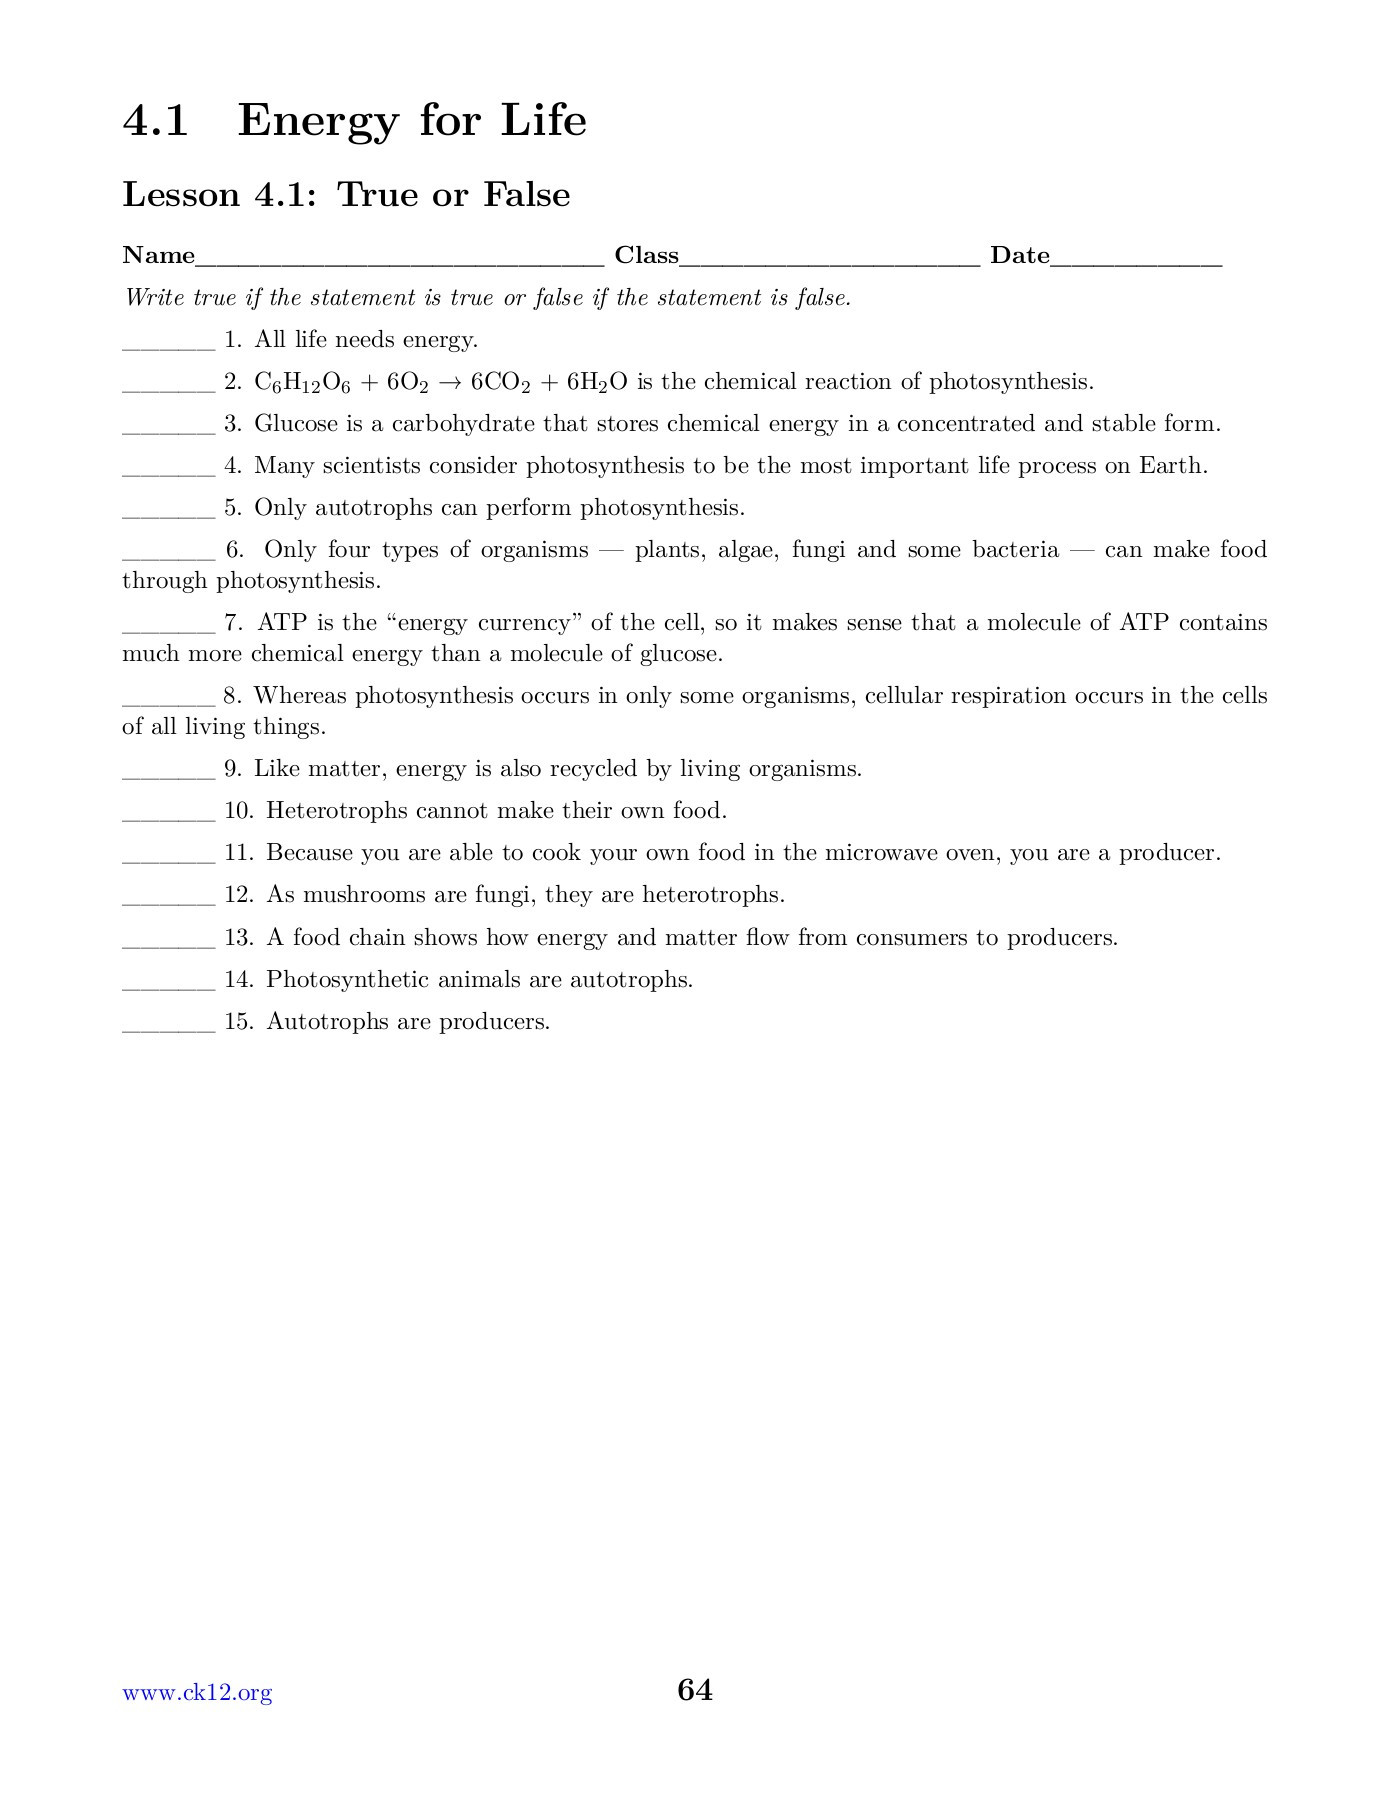 Photosynthesis and Respiration Worksheet Answers Chapter 4 Synthesis and Cellular Respiration Worksheets